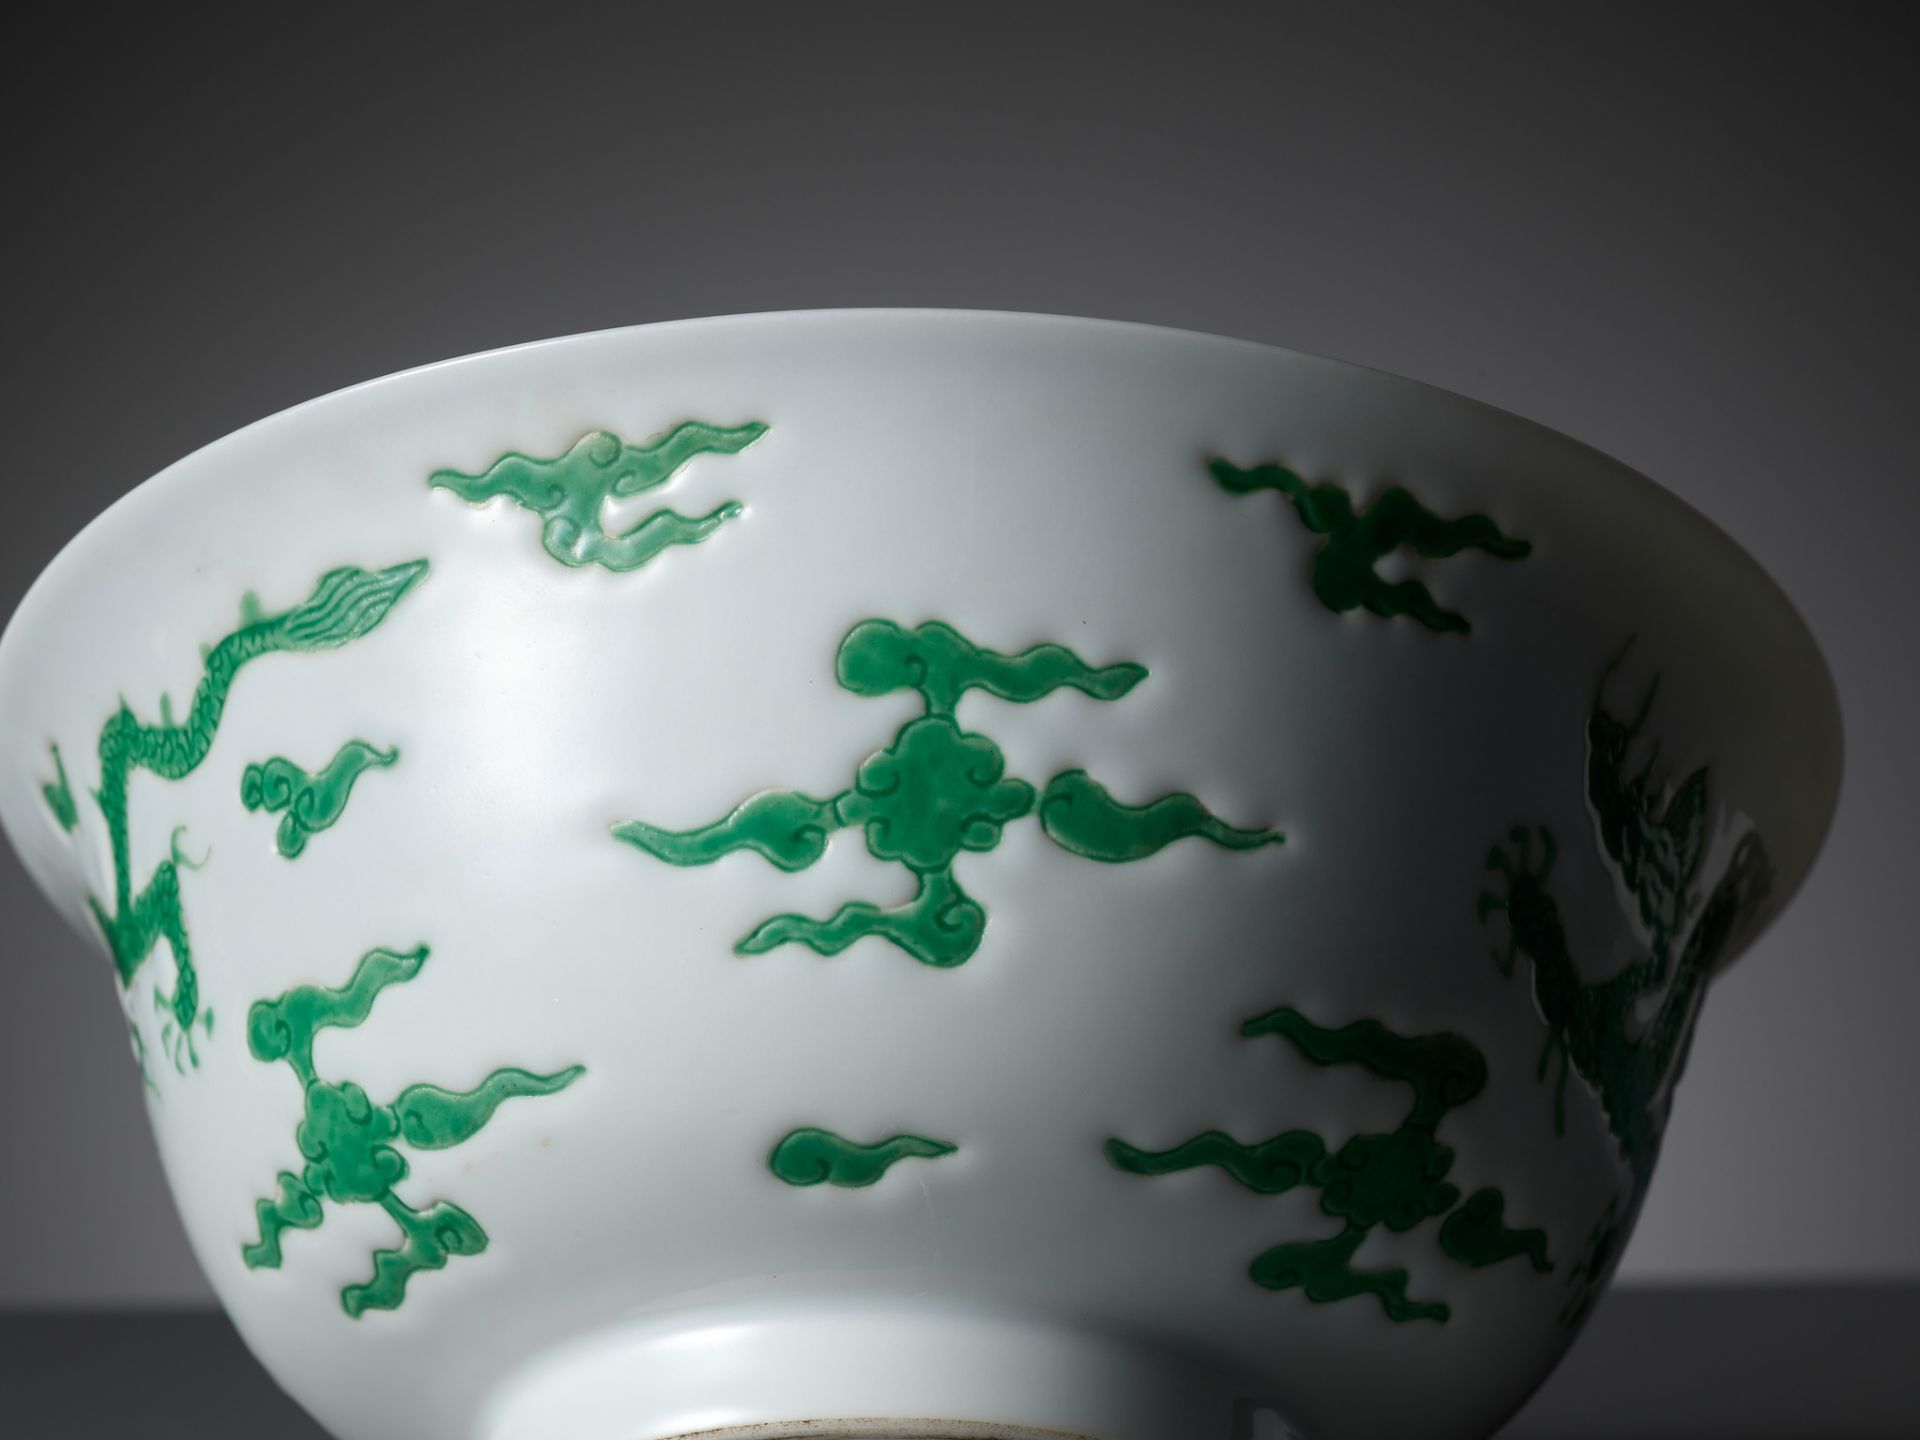 A RARE PAIR OF MING-STYLE GREEN-ENAMELED 'DRAGON' BOWLS, KANGXI PERIOD - Image 18 of 18